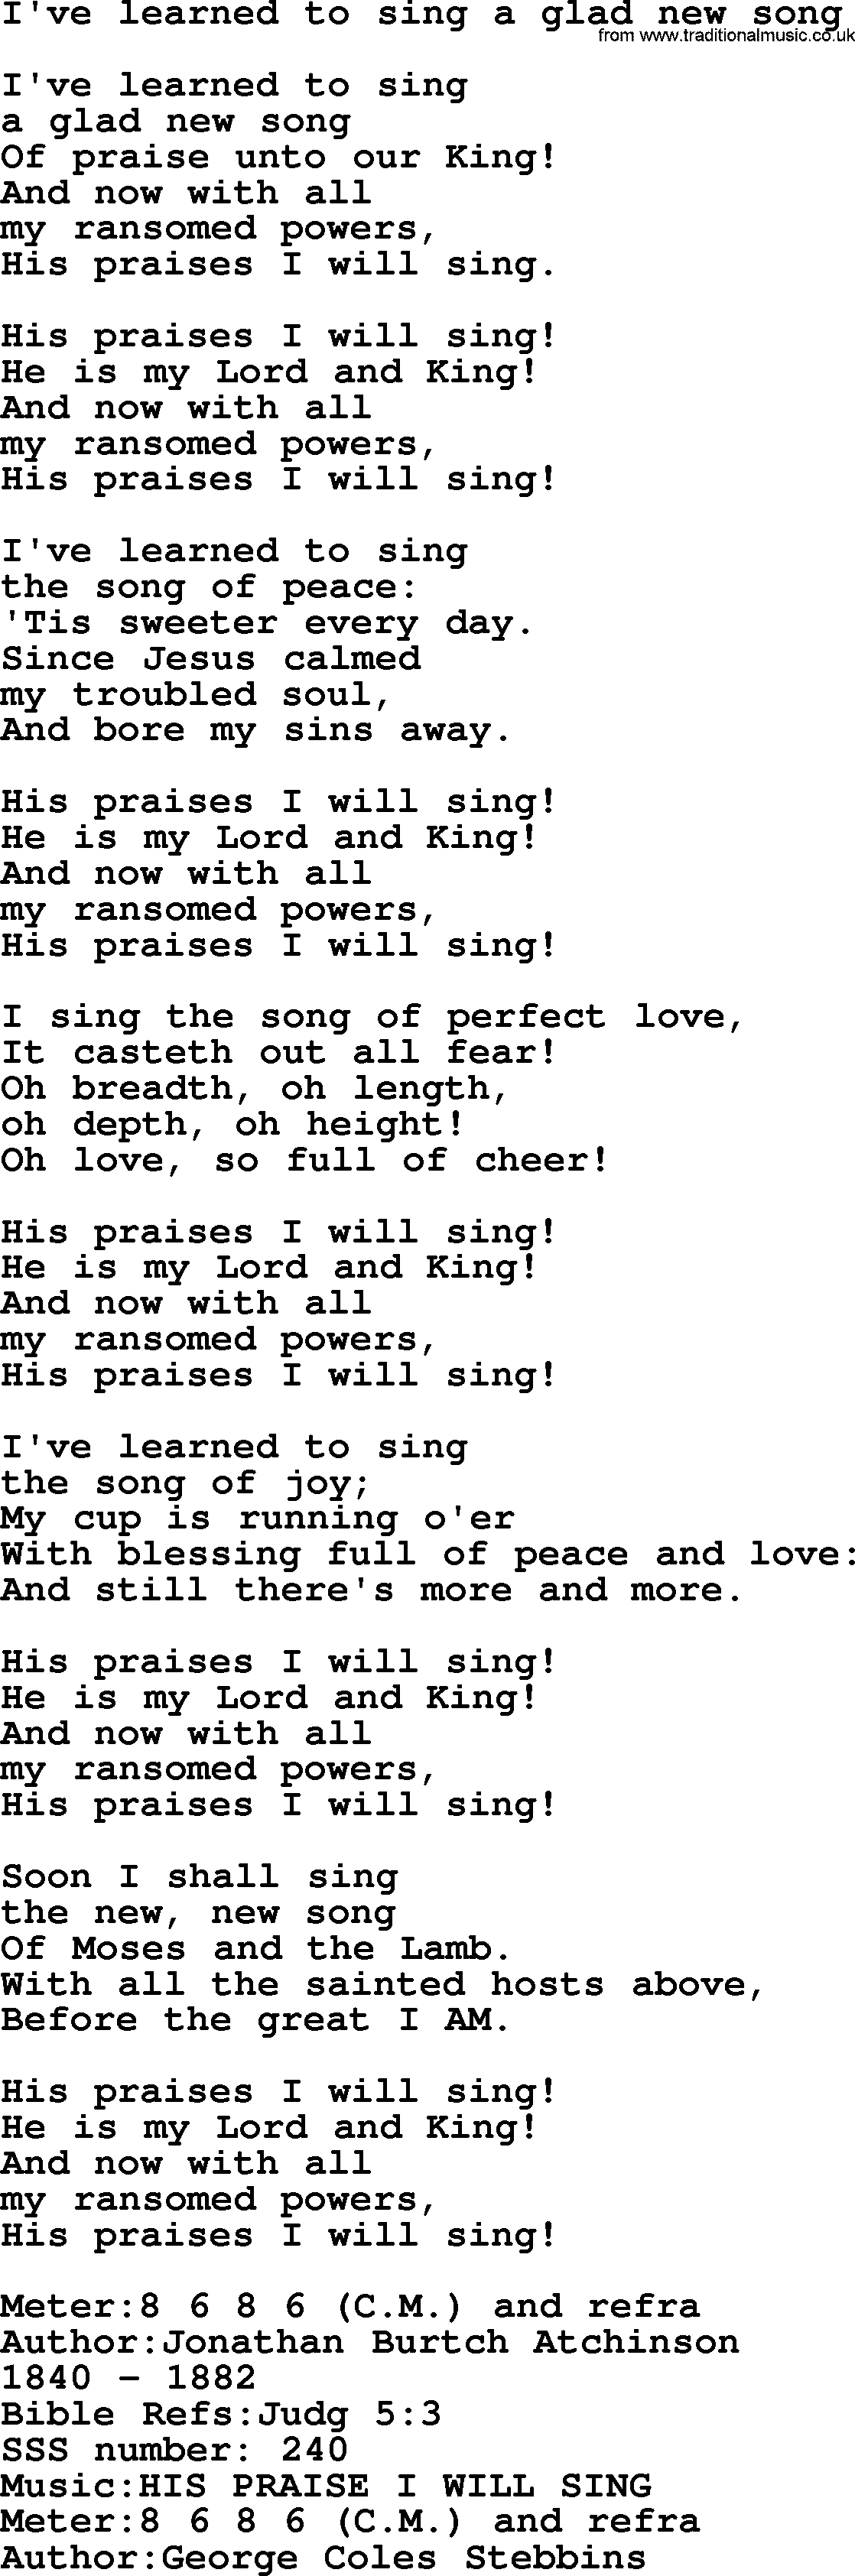 Sacred Songs and Solos complete, 1200 Hymns, title: I've Learned To Sing A Glad New Song, lyrics and PDF